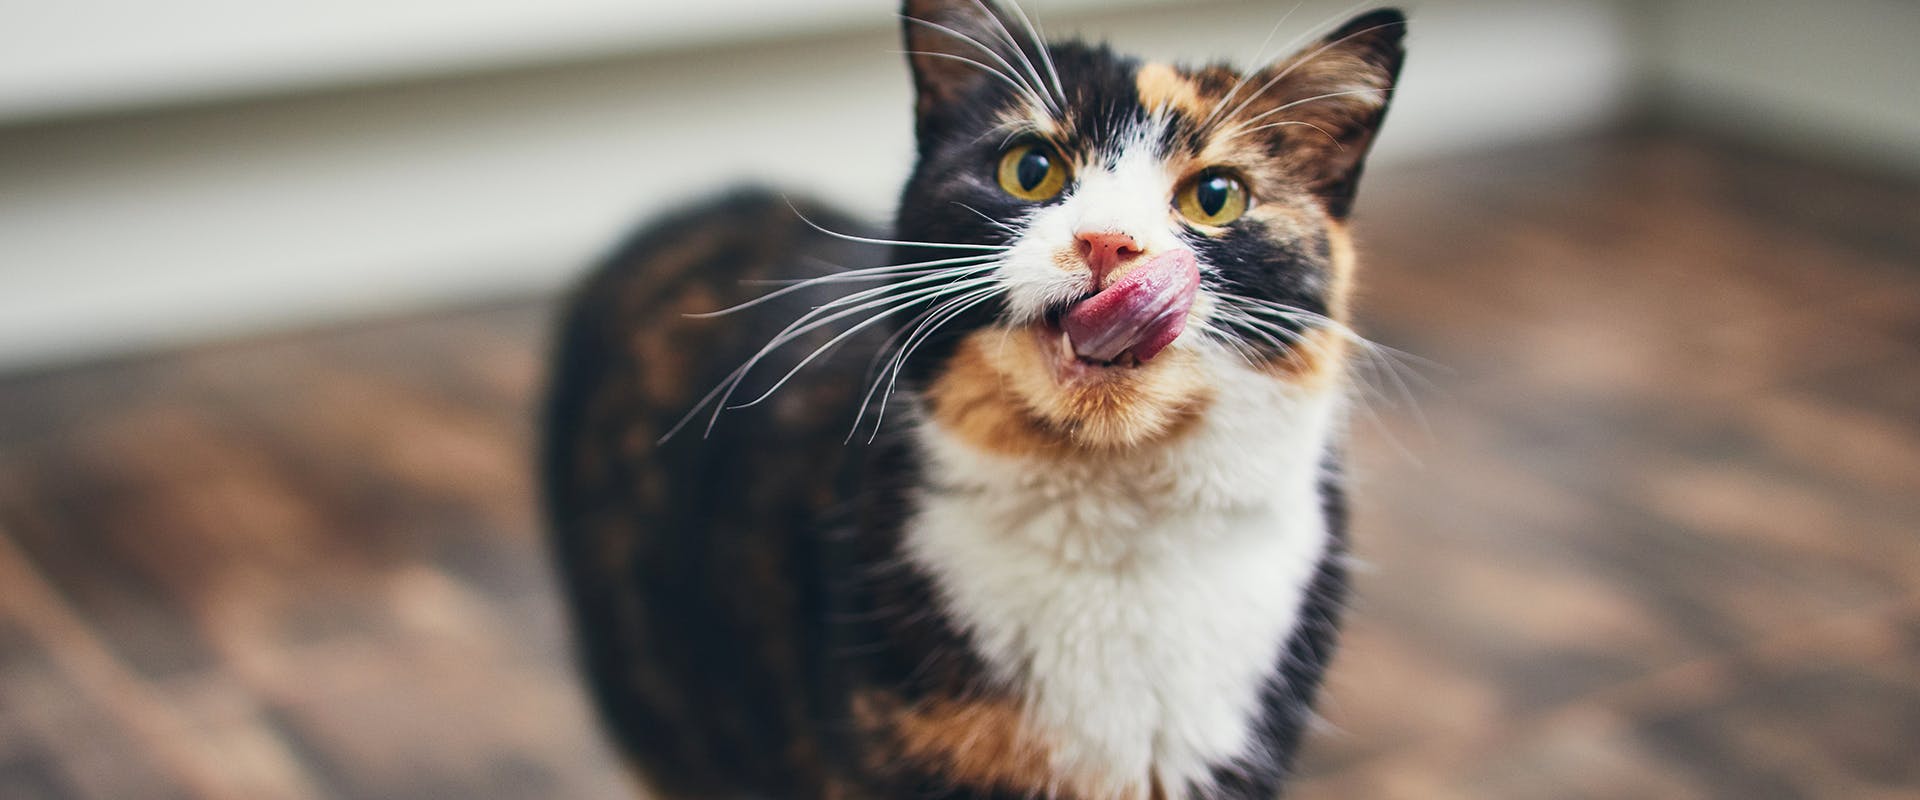 Tortoiseshell cat standing in a kitchen, licking its lips